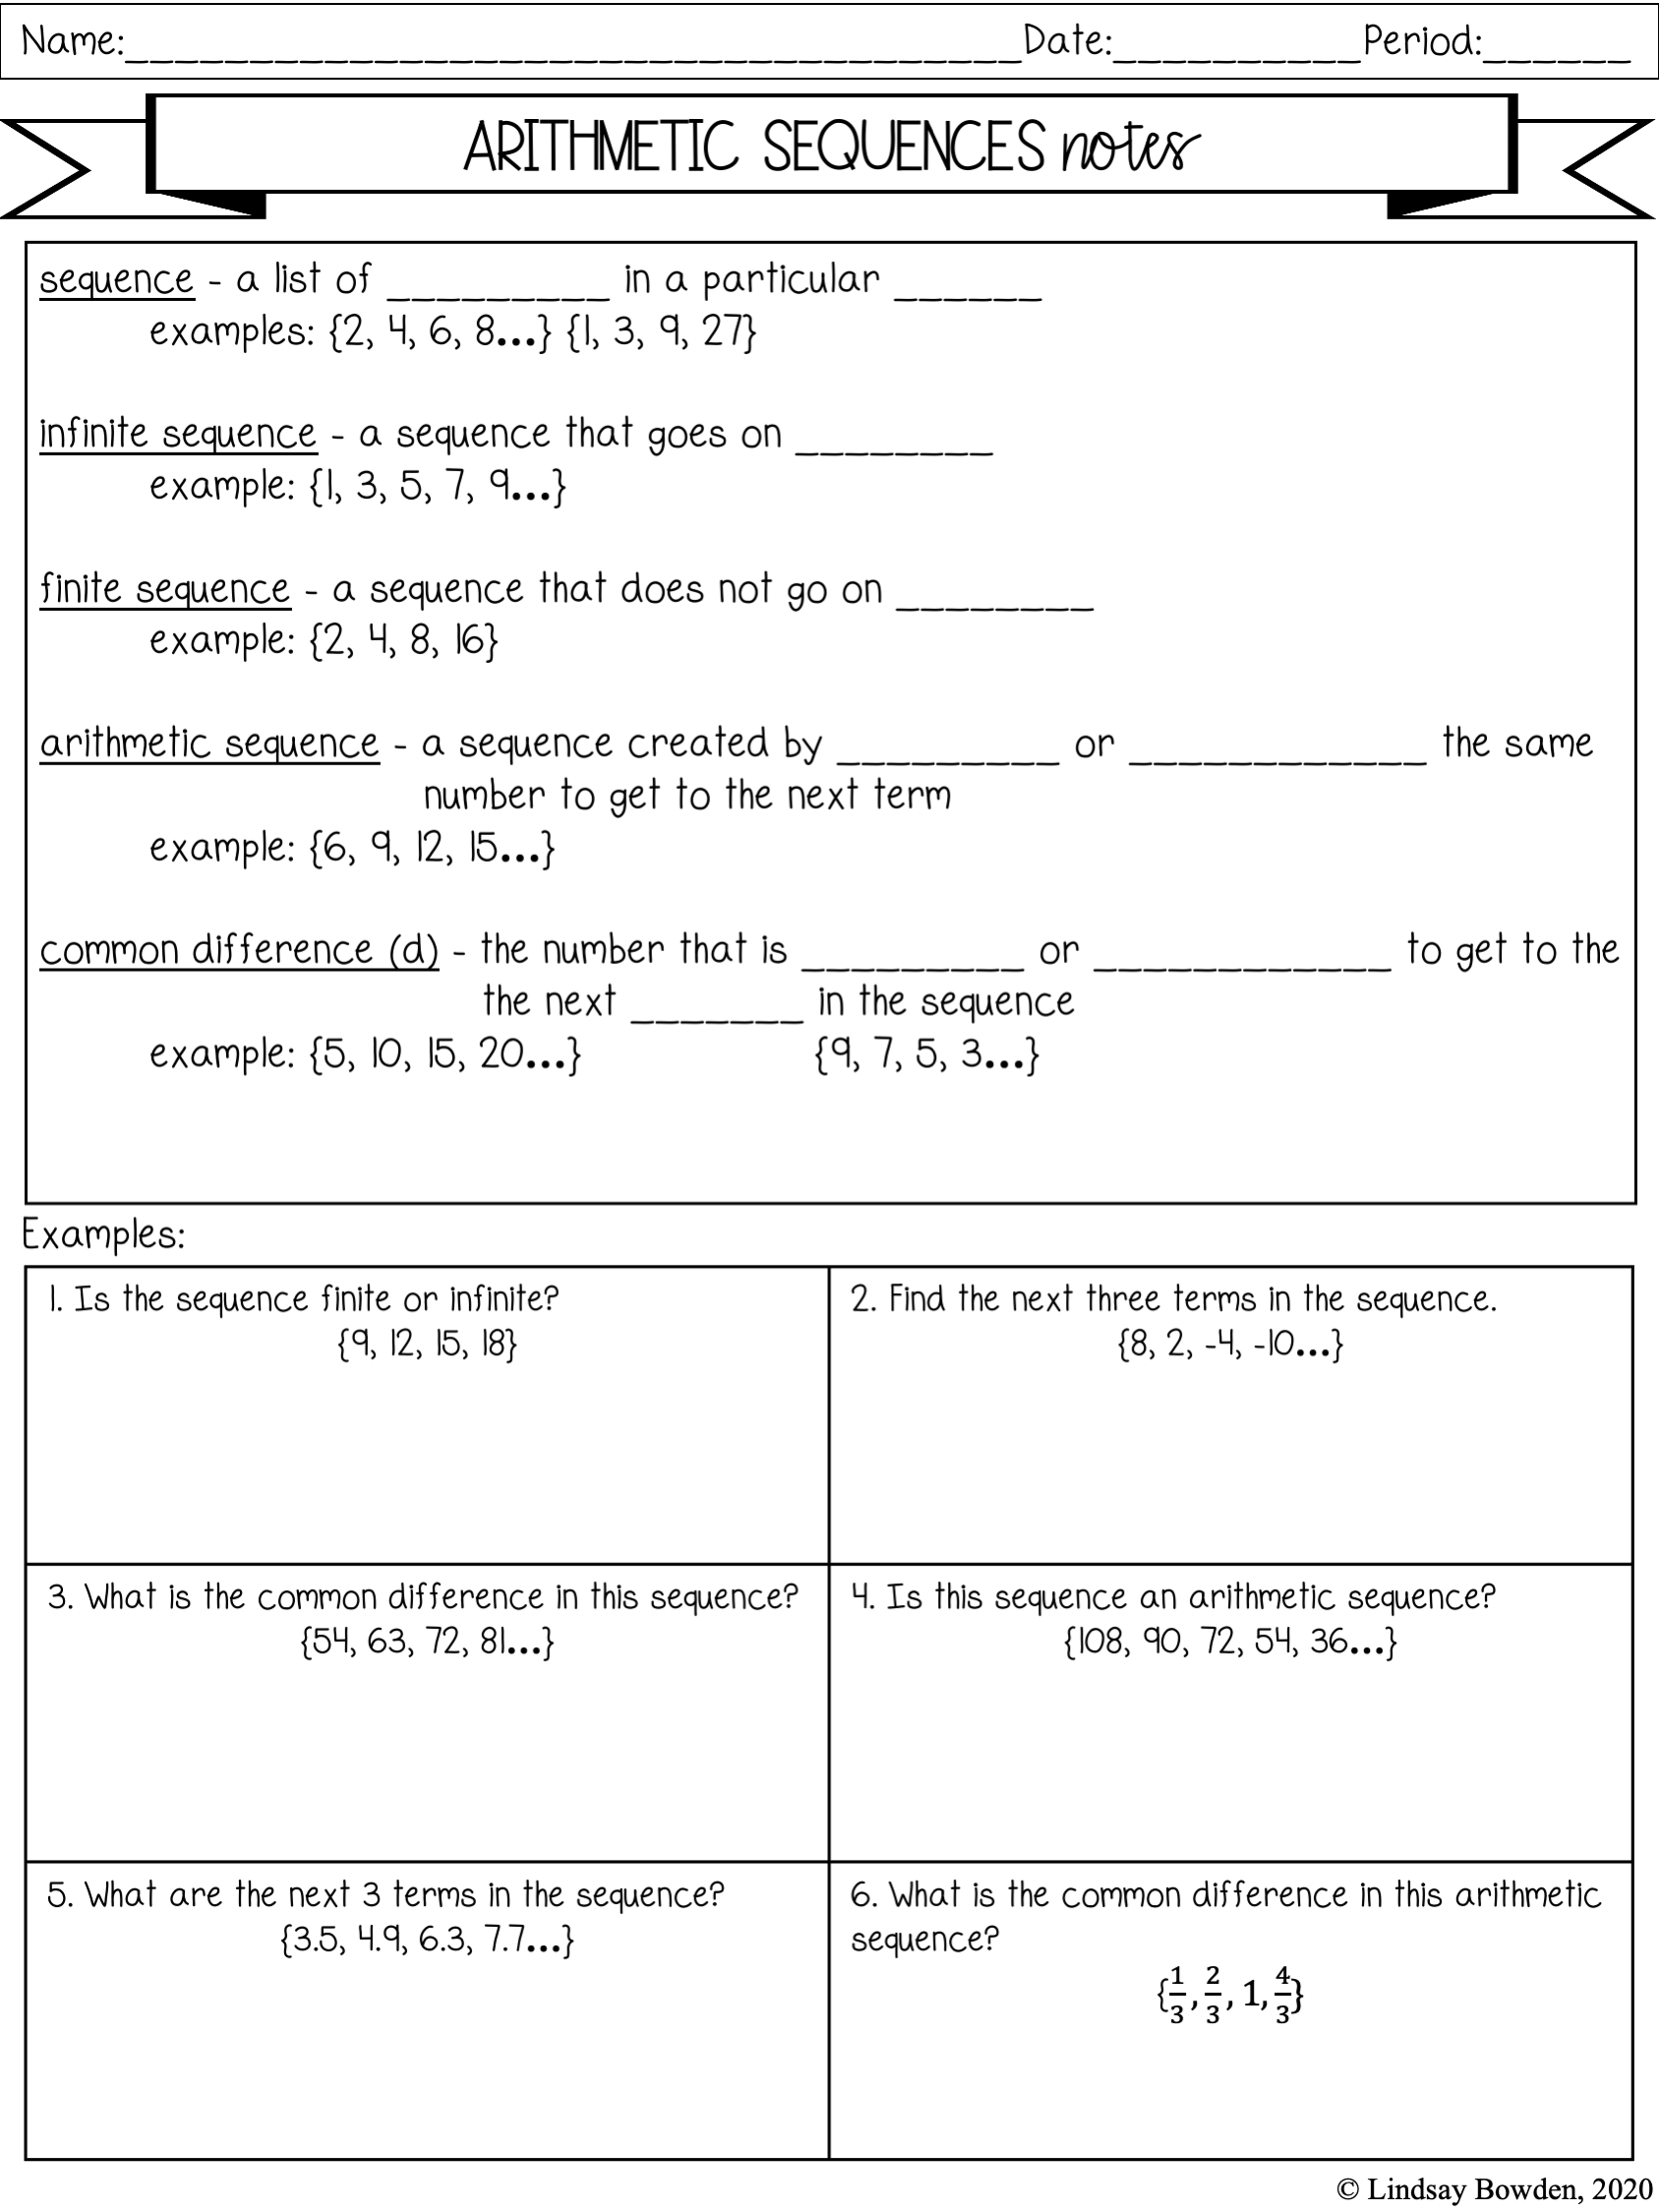 Arithmetic Sequences Notes and Worksheets - Lindsay Bowden Intended For Arithmetic Sequence Worksheet With Answers